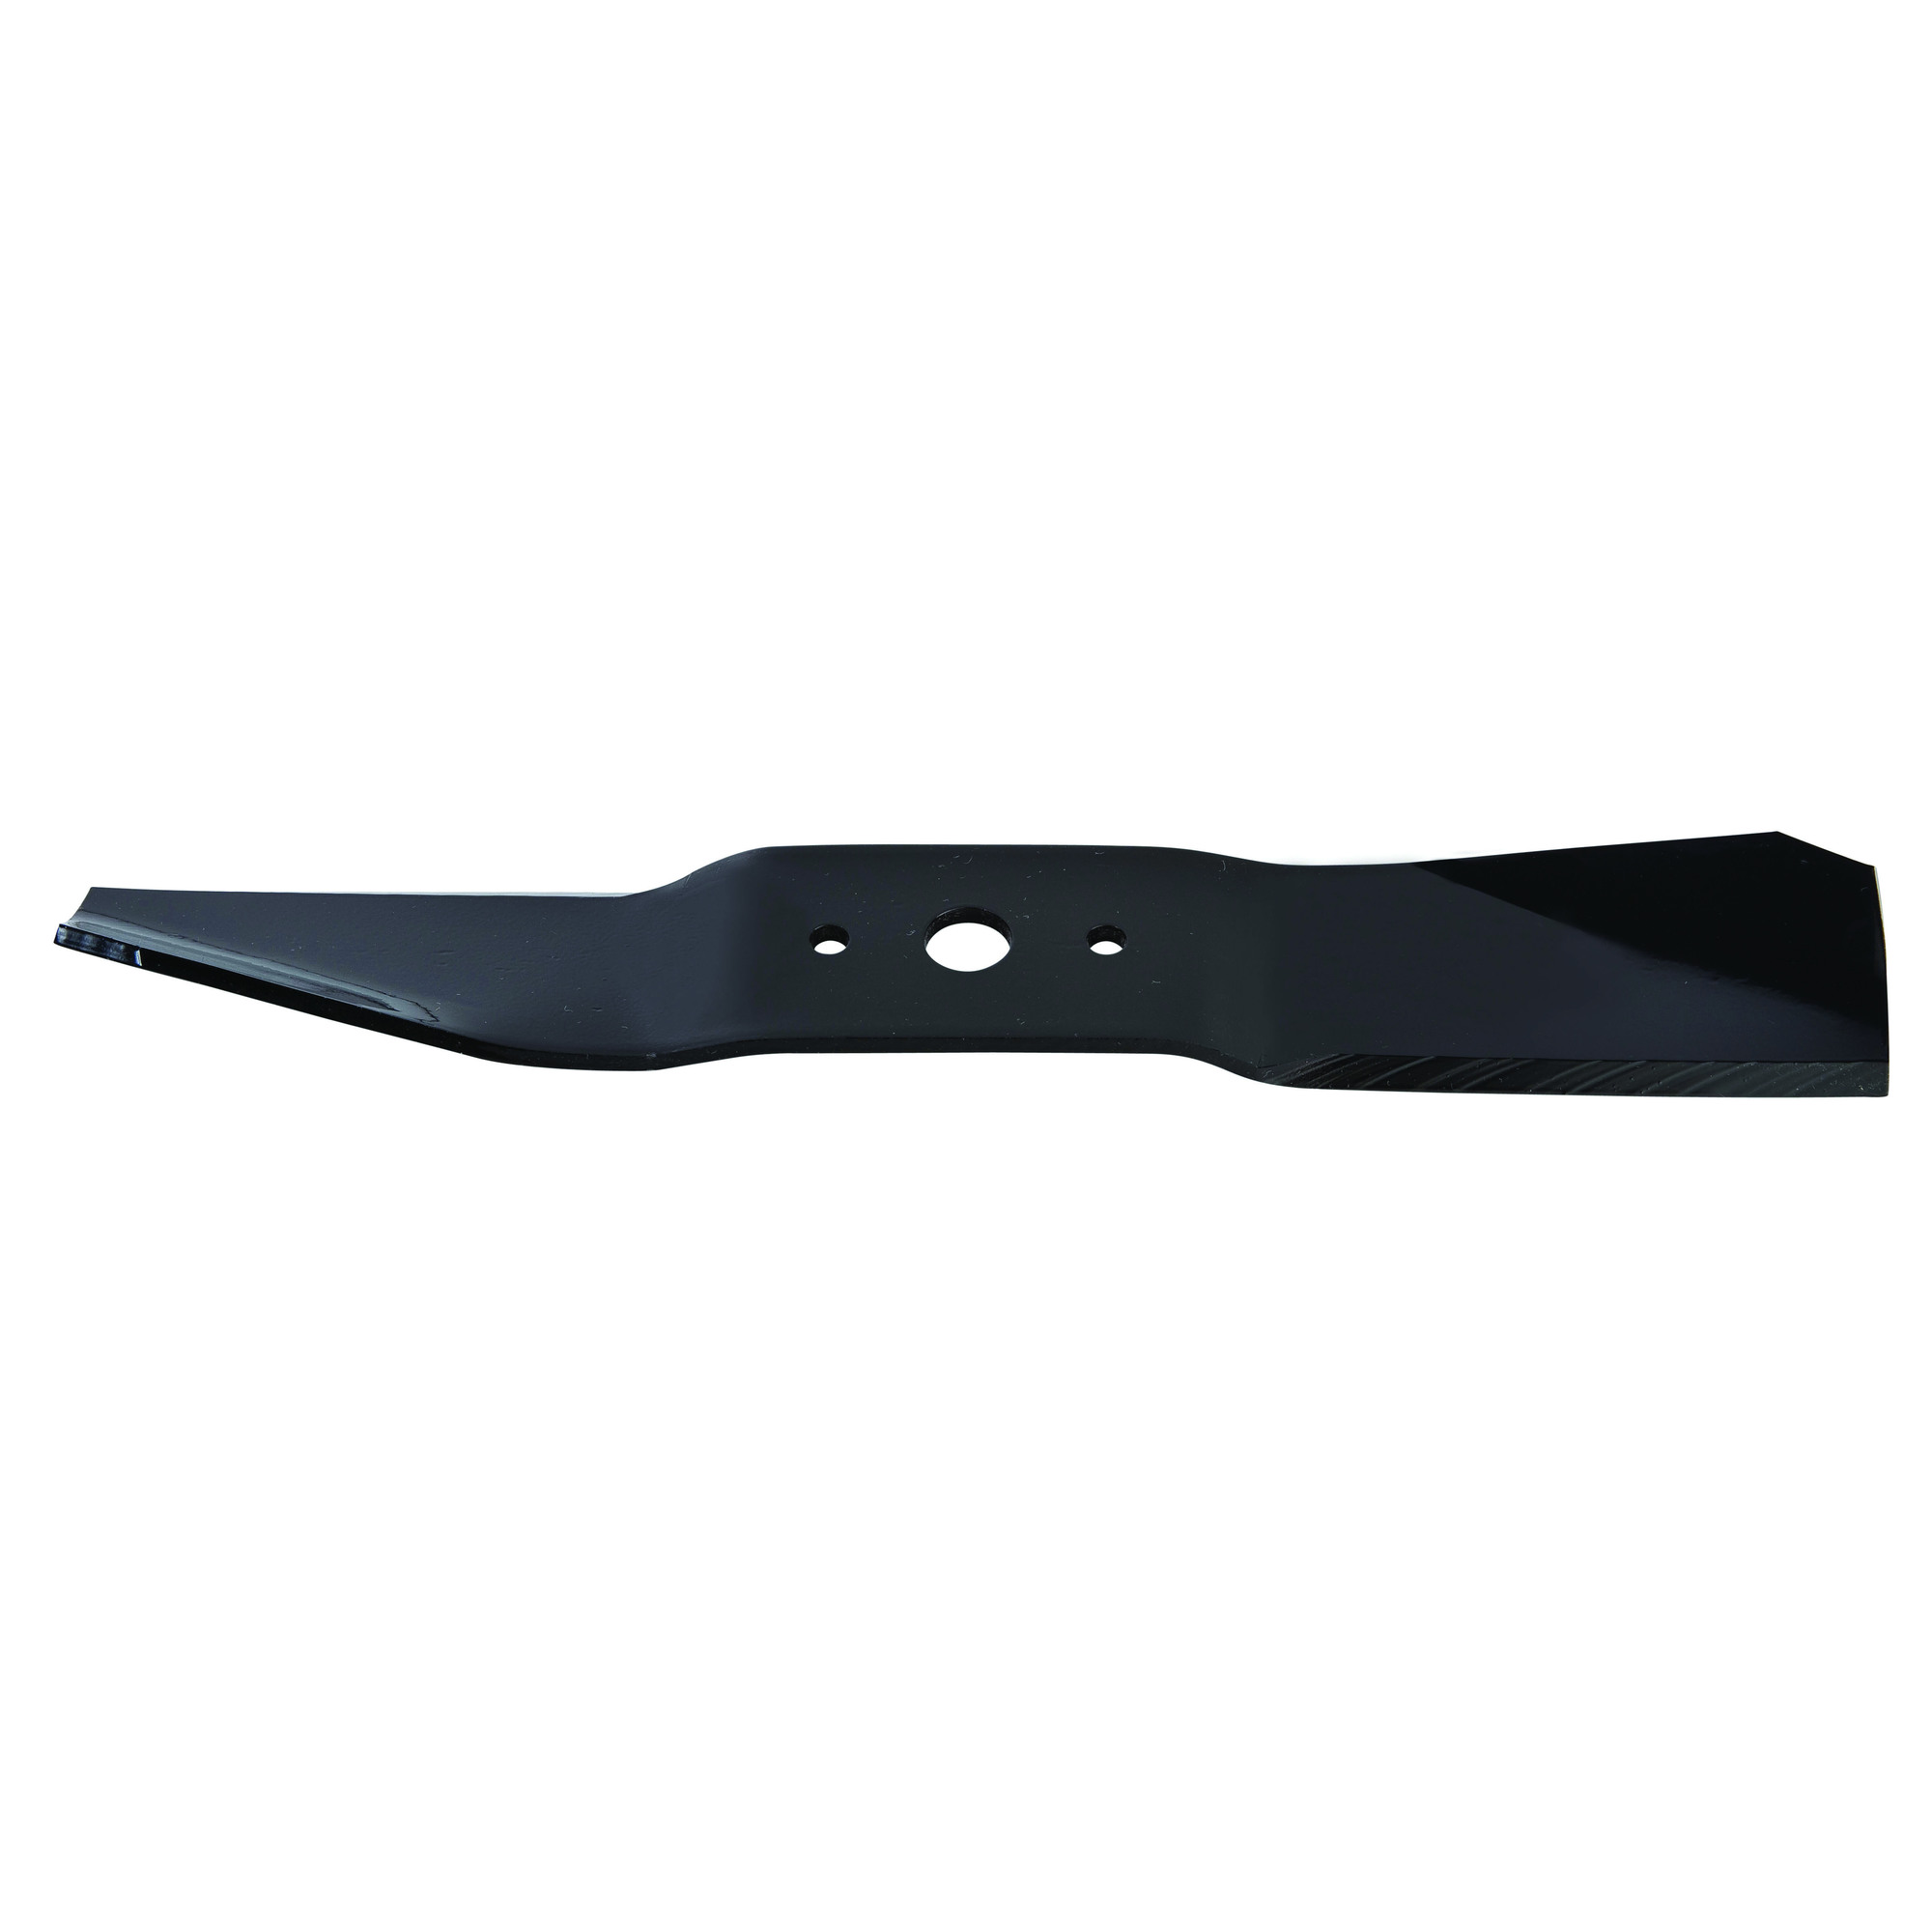 Oregon, Replacement Lawn Mower Blade, Length 16.5 in, Model 91-056